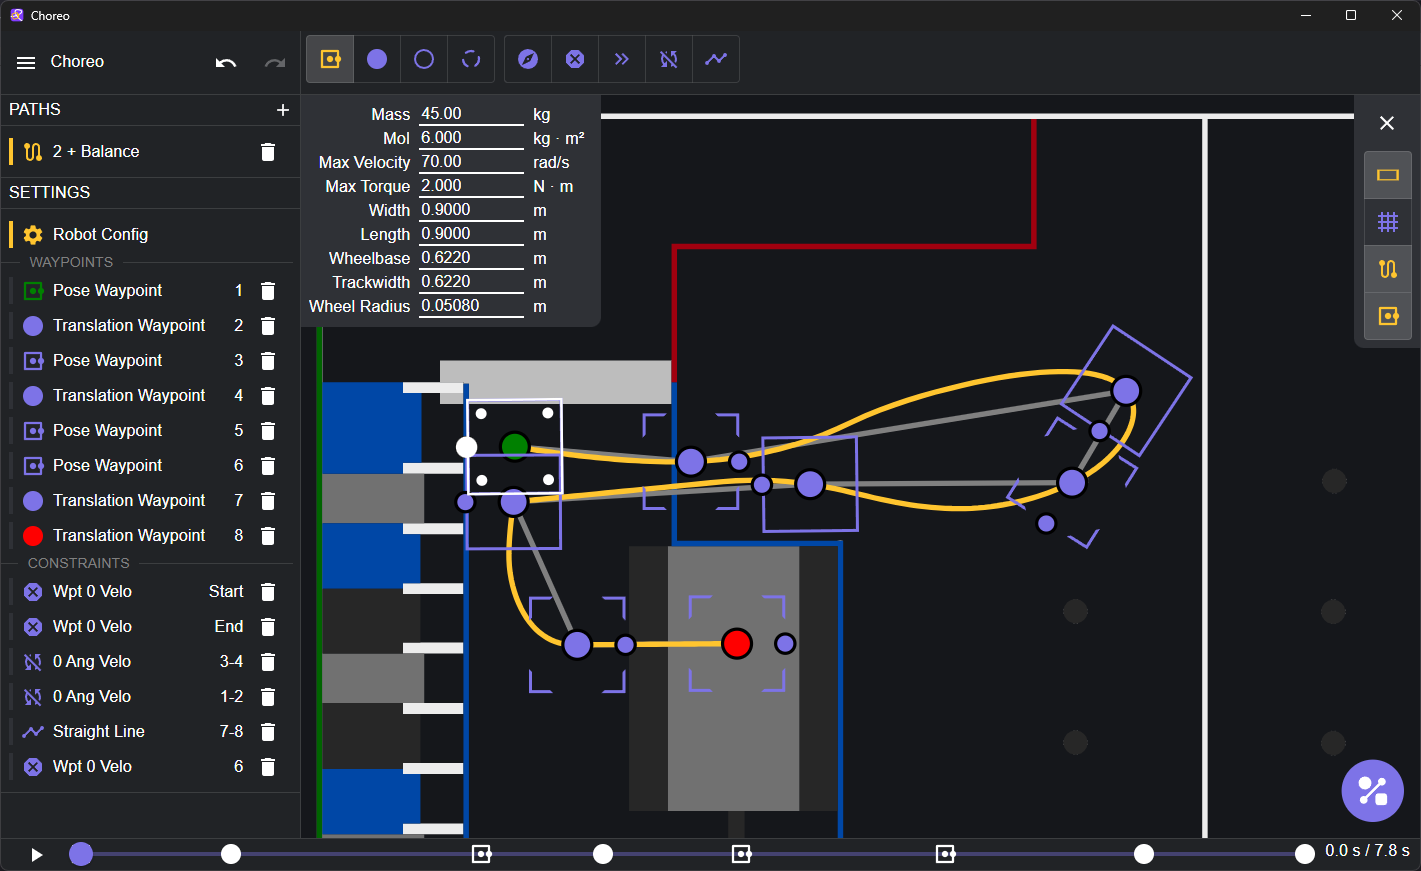 A screenshot of choreo with an example path